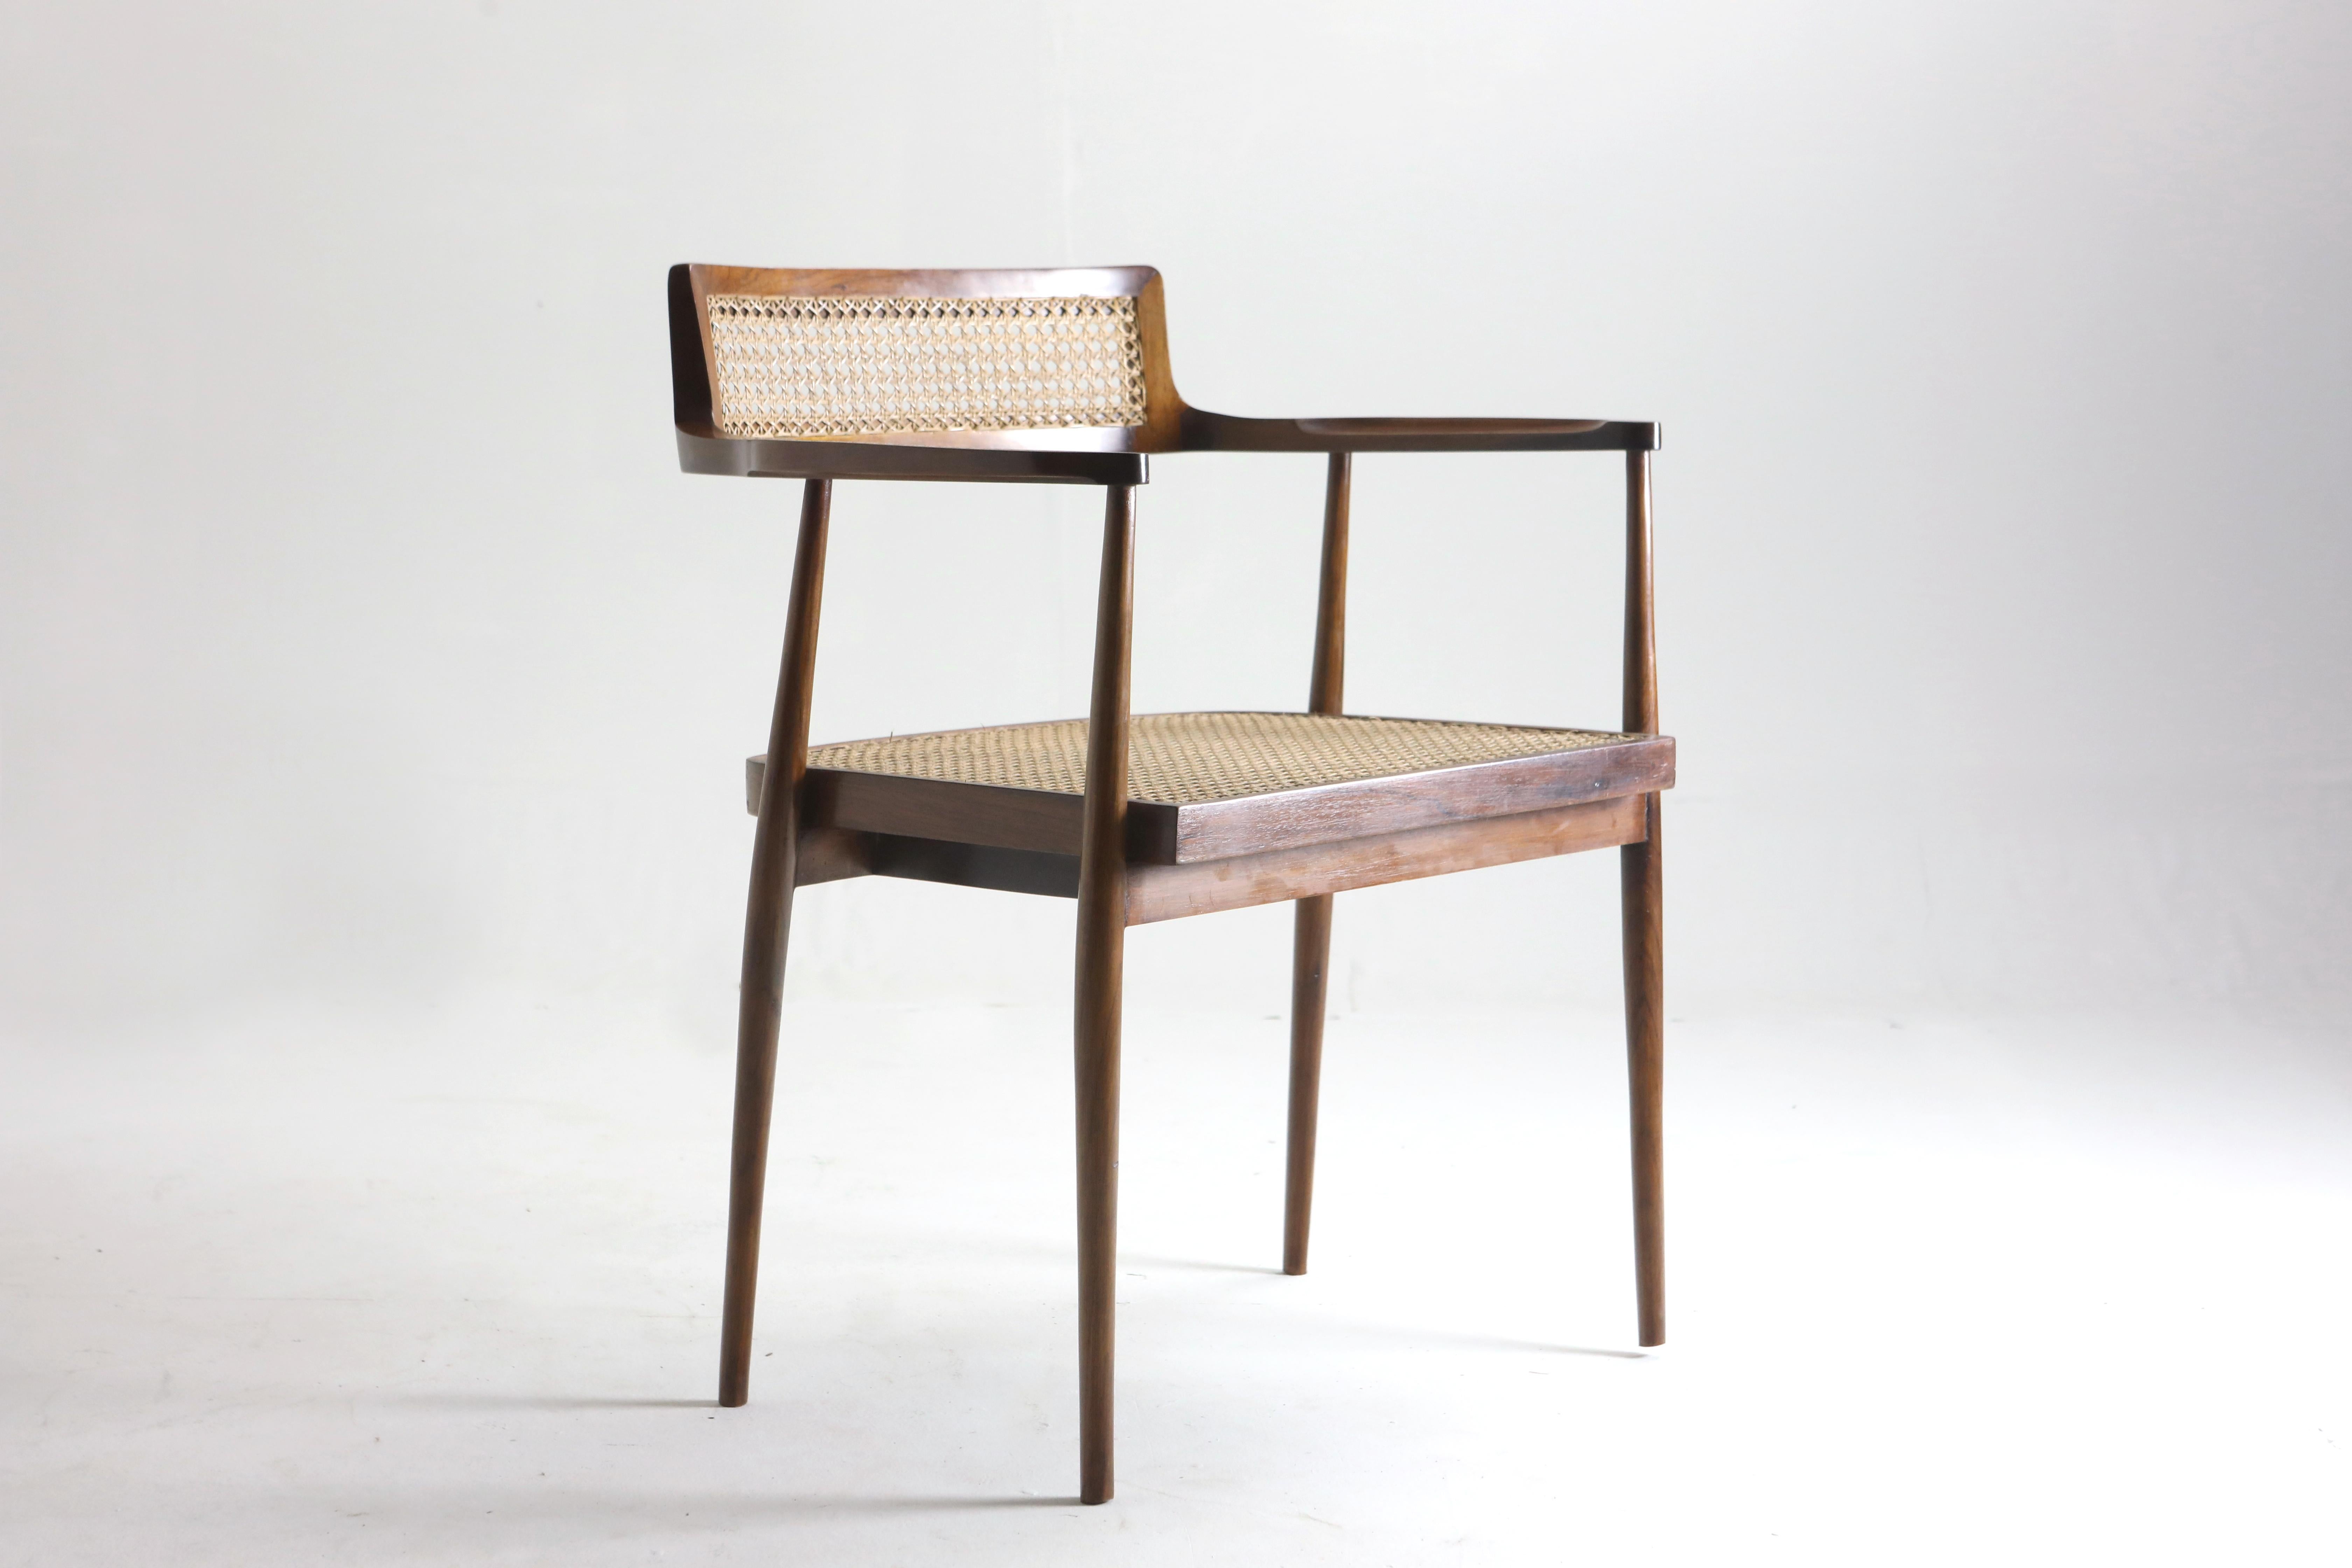 Mid-Century Modern pair of wood armchairs by Joaquim Tenreiro, Brazil 1960s

These elegant armchairs, designed by the great name of Brazilian Mid-Century Modern Design, Joaquim Tenreiro, showcase the minimal and sculptural craftsmanship that